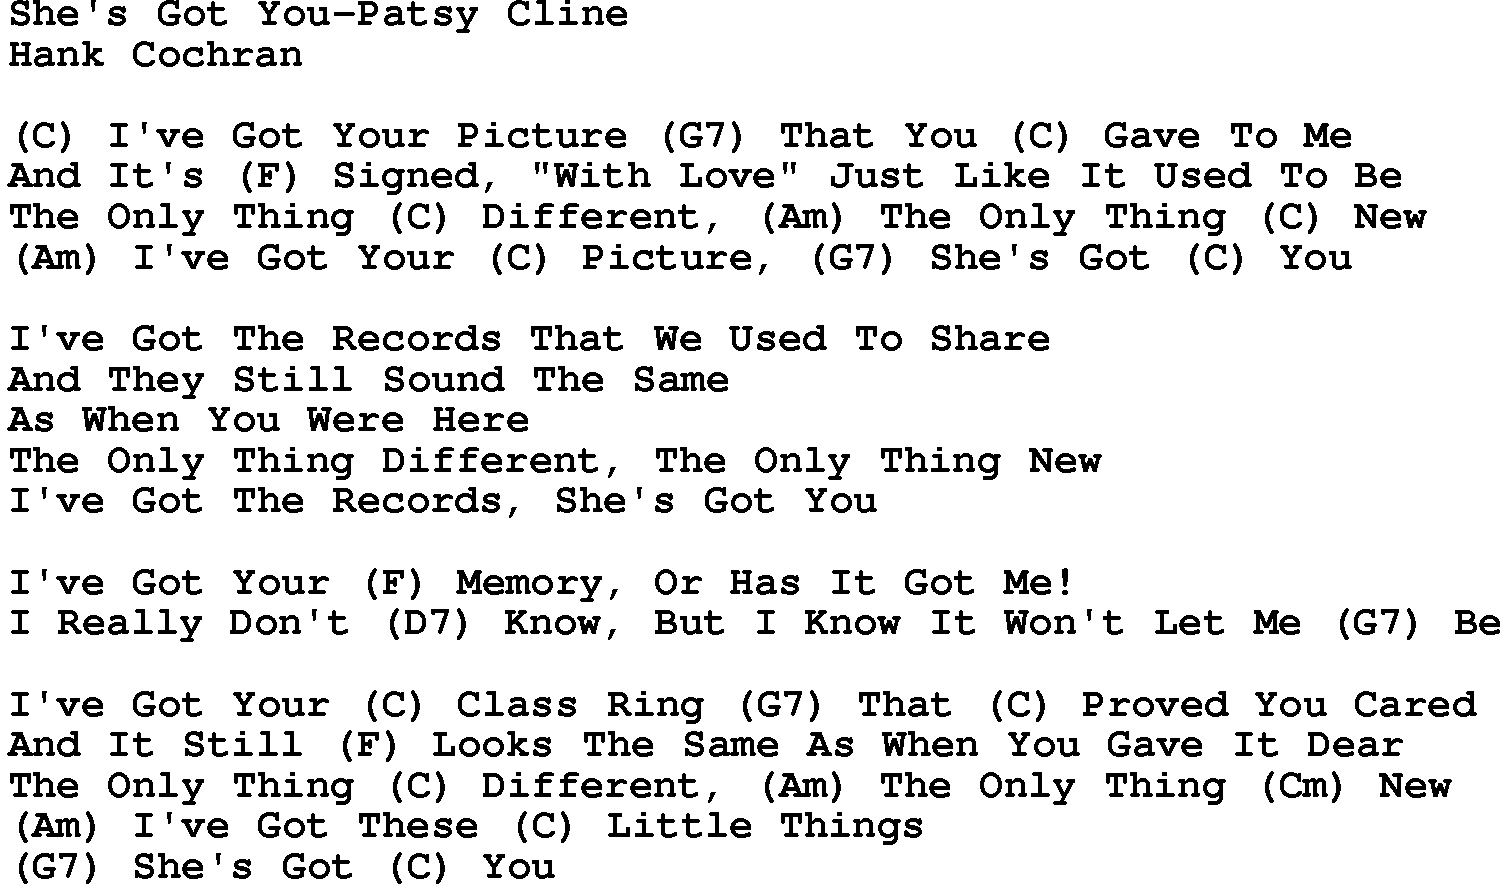 Country music song: She's Got You-Patsy Cline lyrics and chords